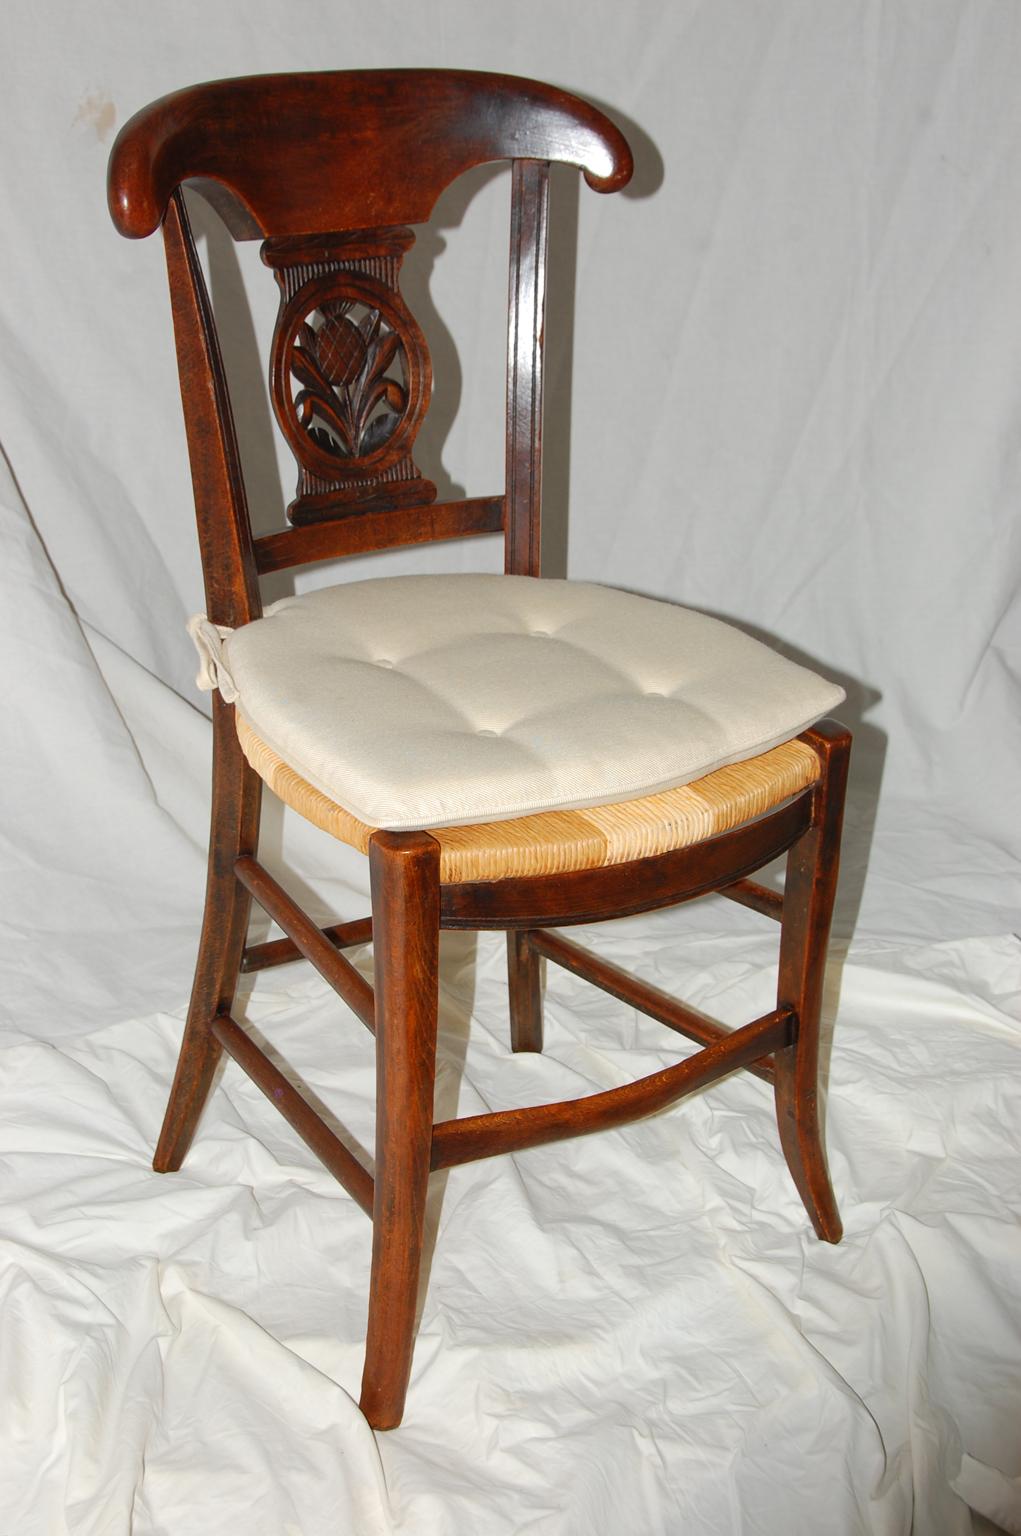 French Provincial 19th century set of six dining chairs, pineapple carved curved backs, box stretchers, splay legs, rush seats with custom made tie on buttoned, reversible cream colored pads. The pattern of the rushing is of two types but is all in